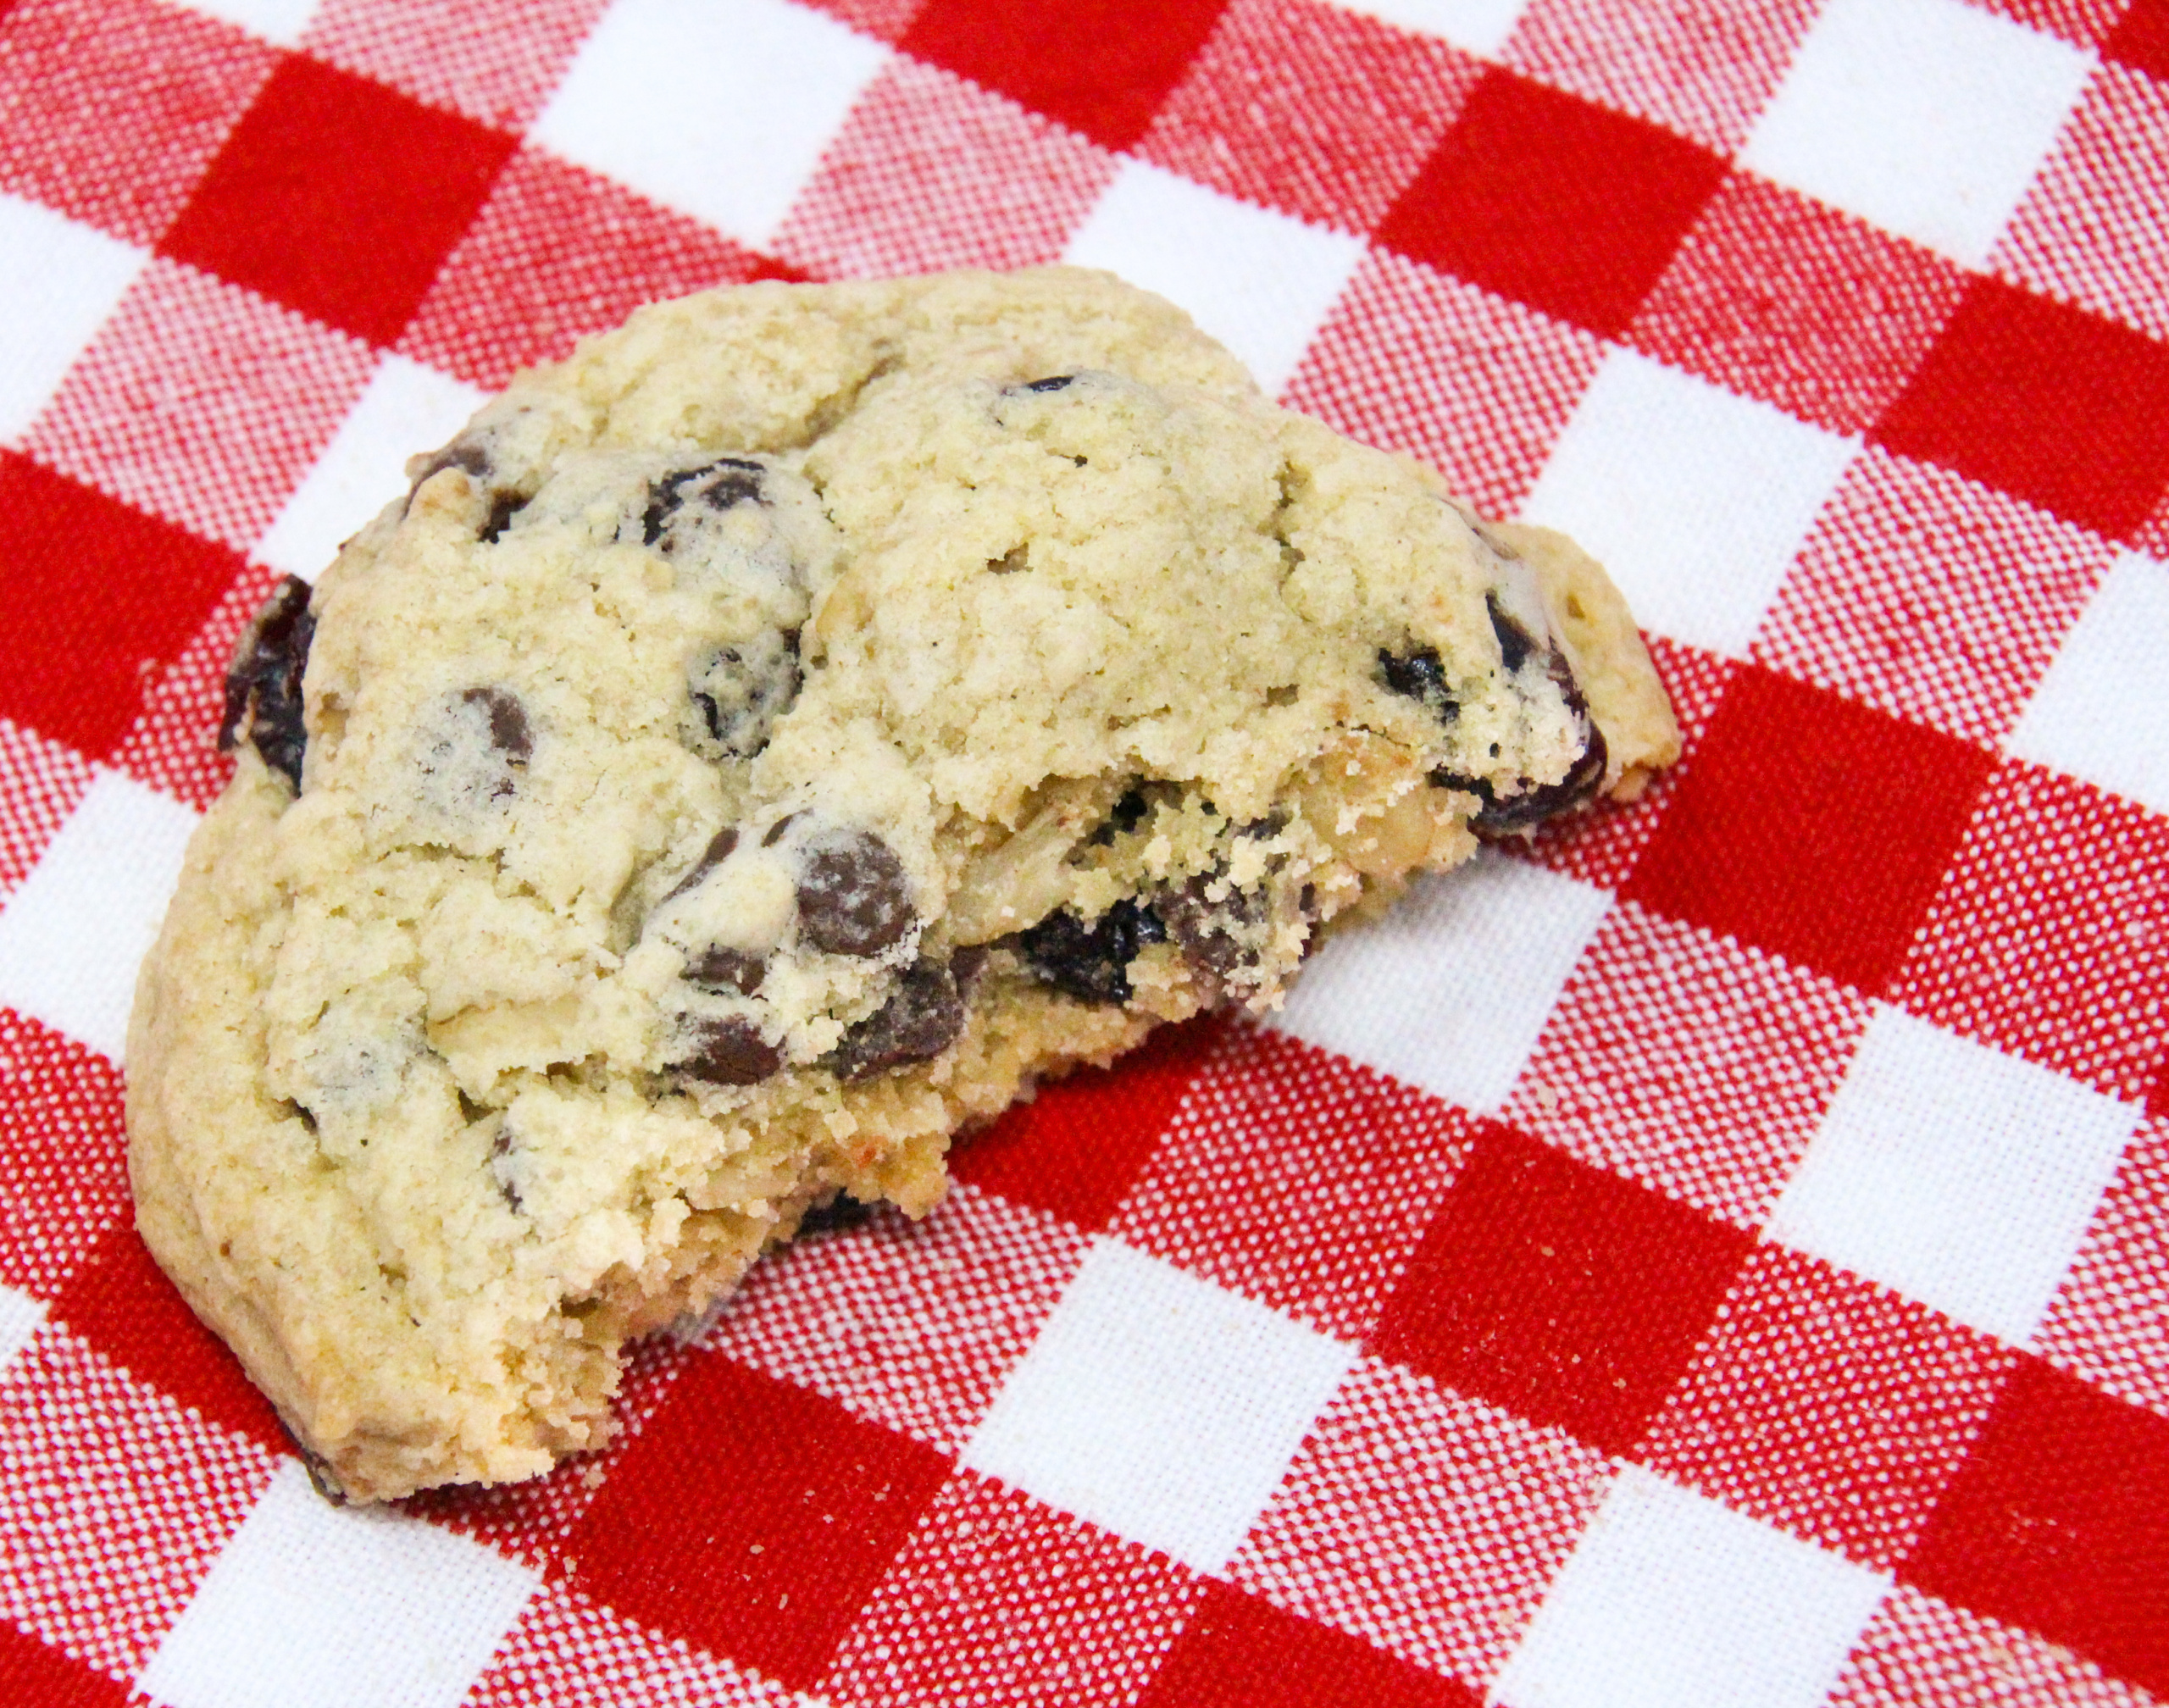 With a generous amount of cherries to balance the chocolate, and oatmeal to add an appealing texture, these hearty Cherry Chocolate Chip cookies are a special treat! Recipe shared with permission granted by Krista Davis, author of THE DIVA DELIVERS ON A PROMISE. 